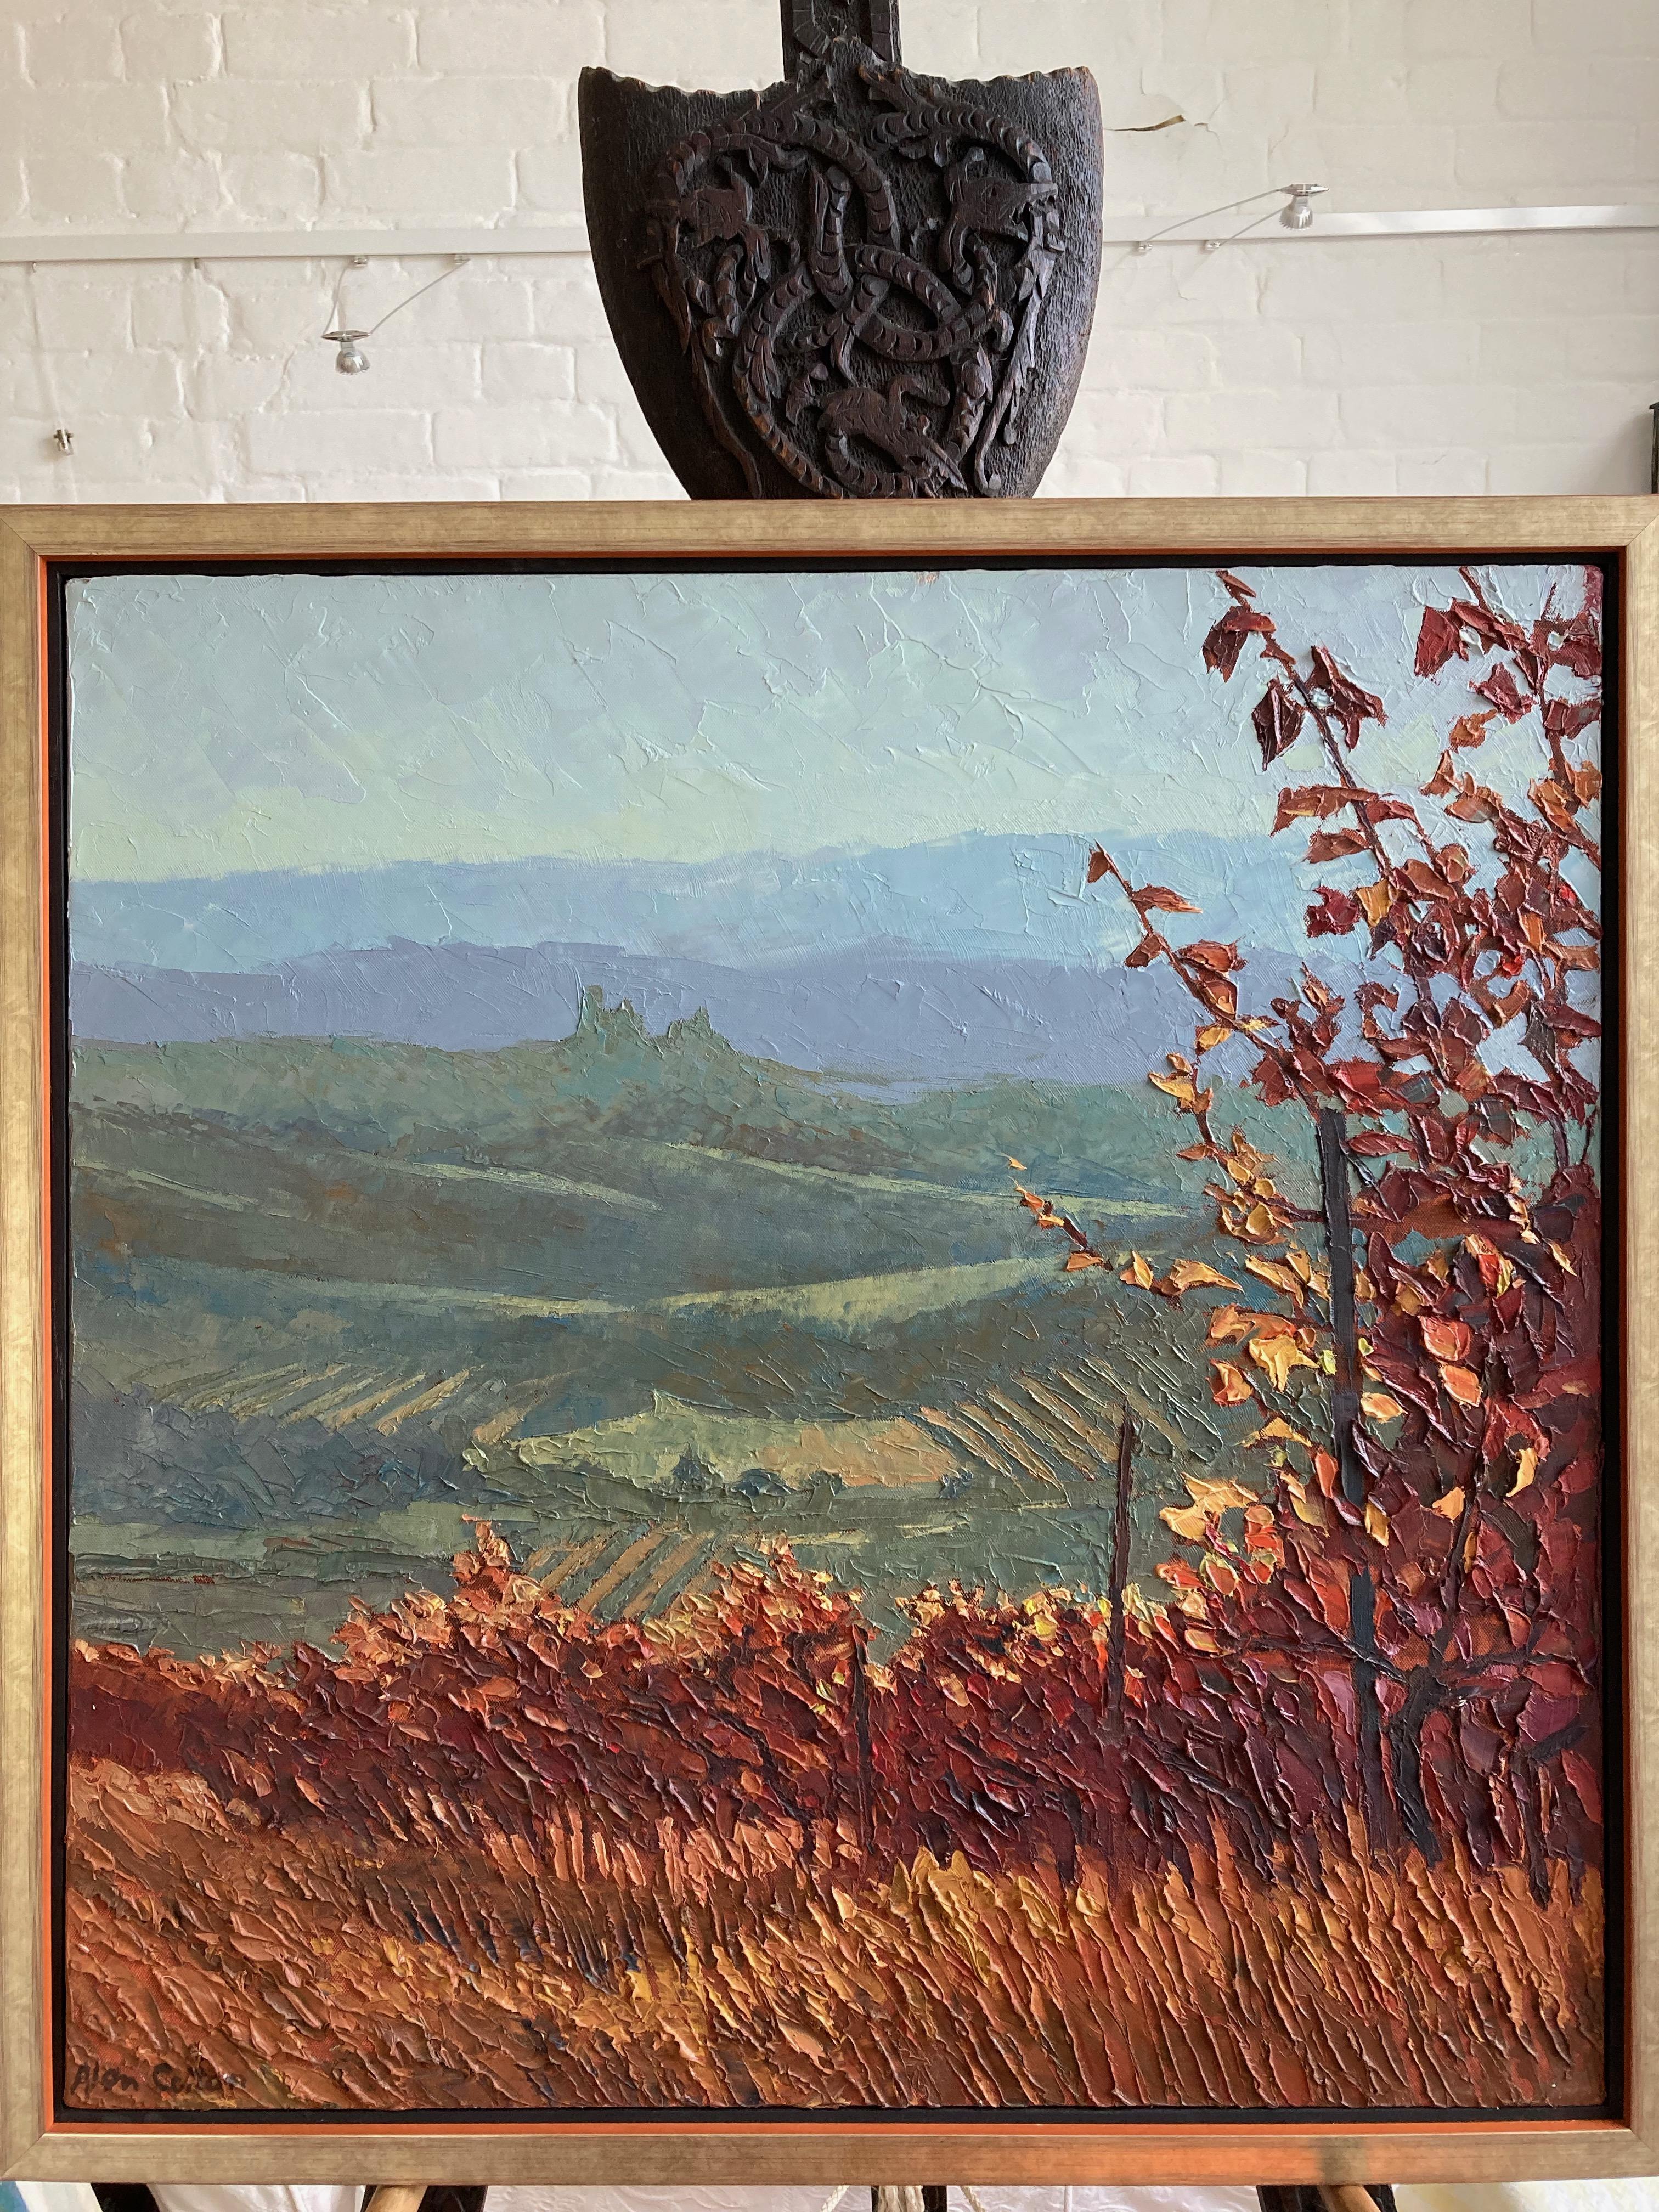 A wonderful view of an Italian vineyard in the Piedmont (or Piemonte) region in North West Italy. The area is known for its wine and truffles and this particular scene is in Dogliani ,an area known for the Dolcetto grape. The scene is painted with